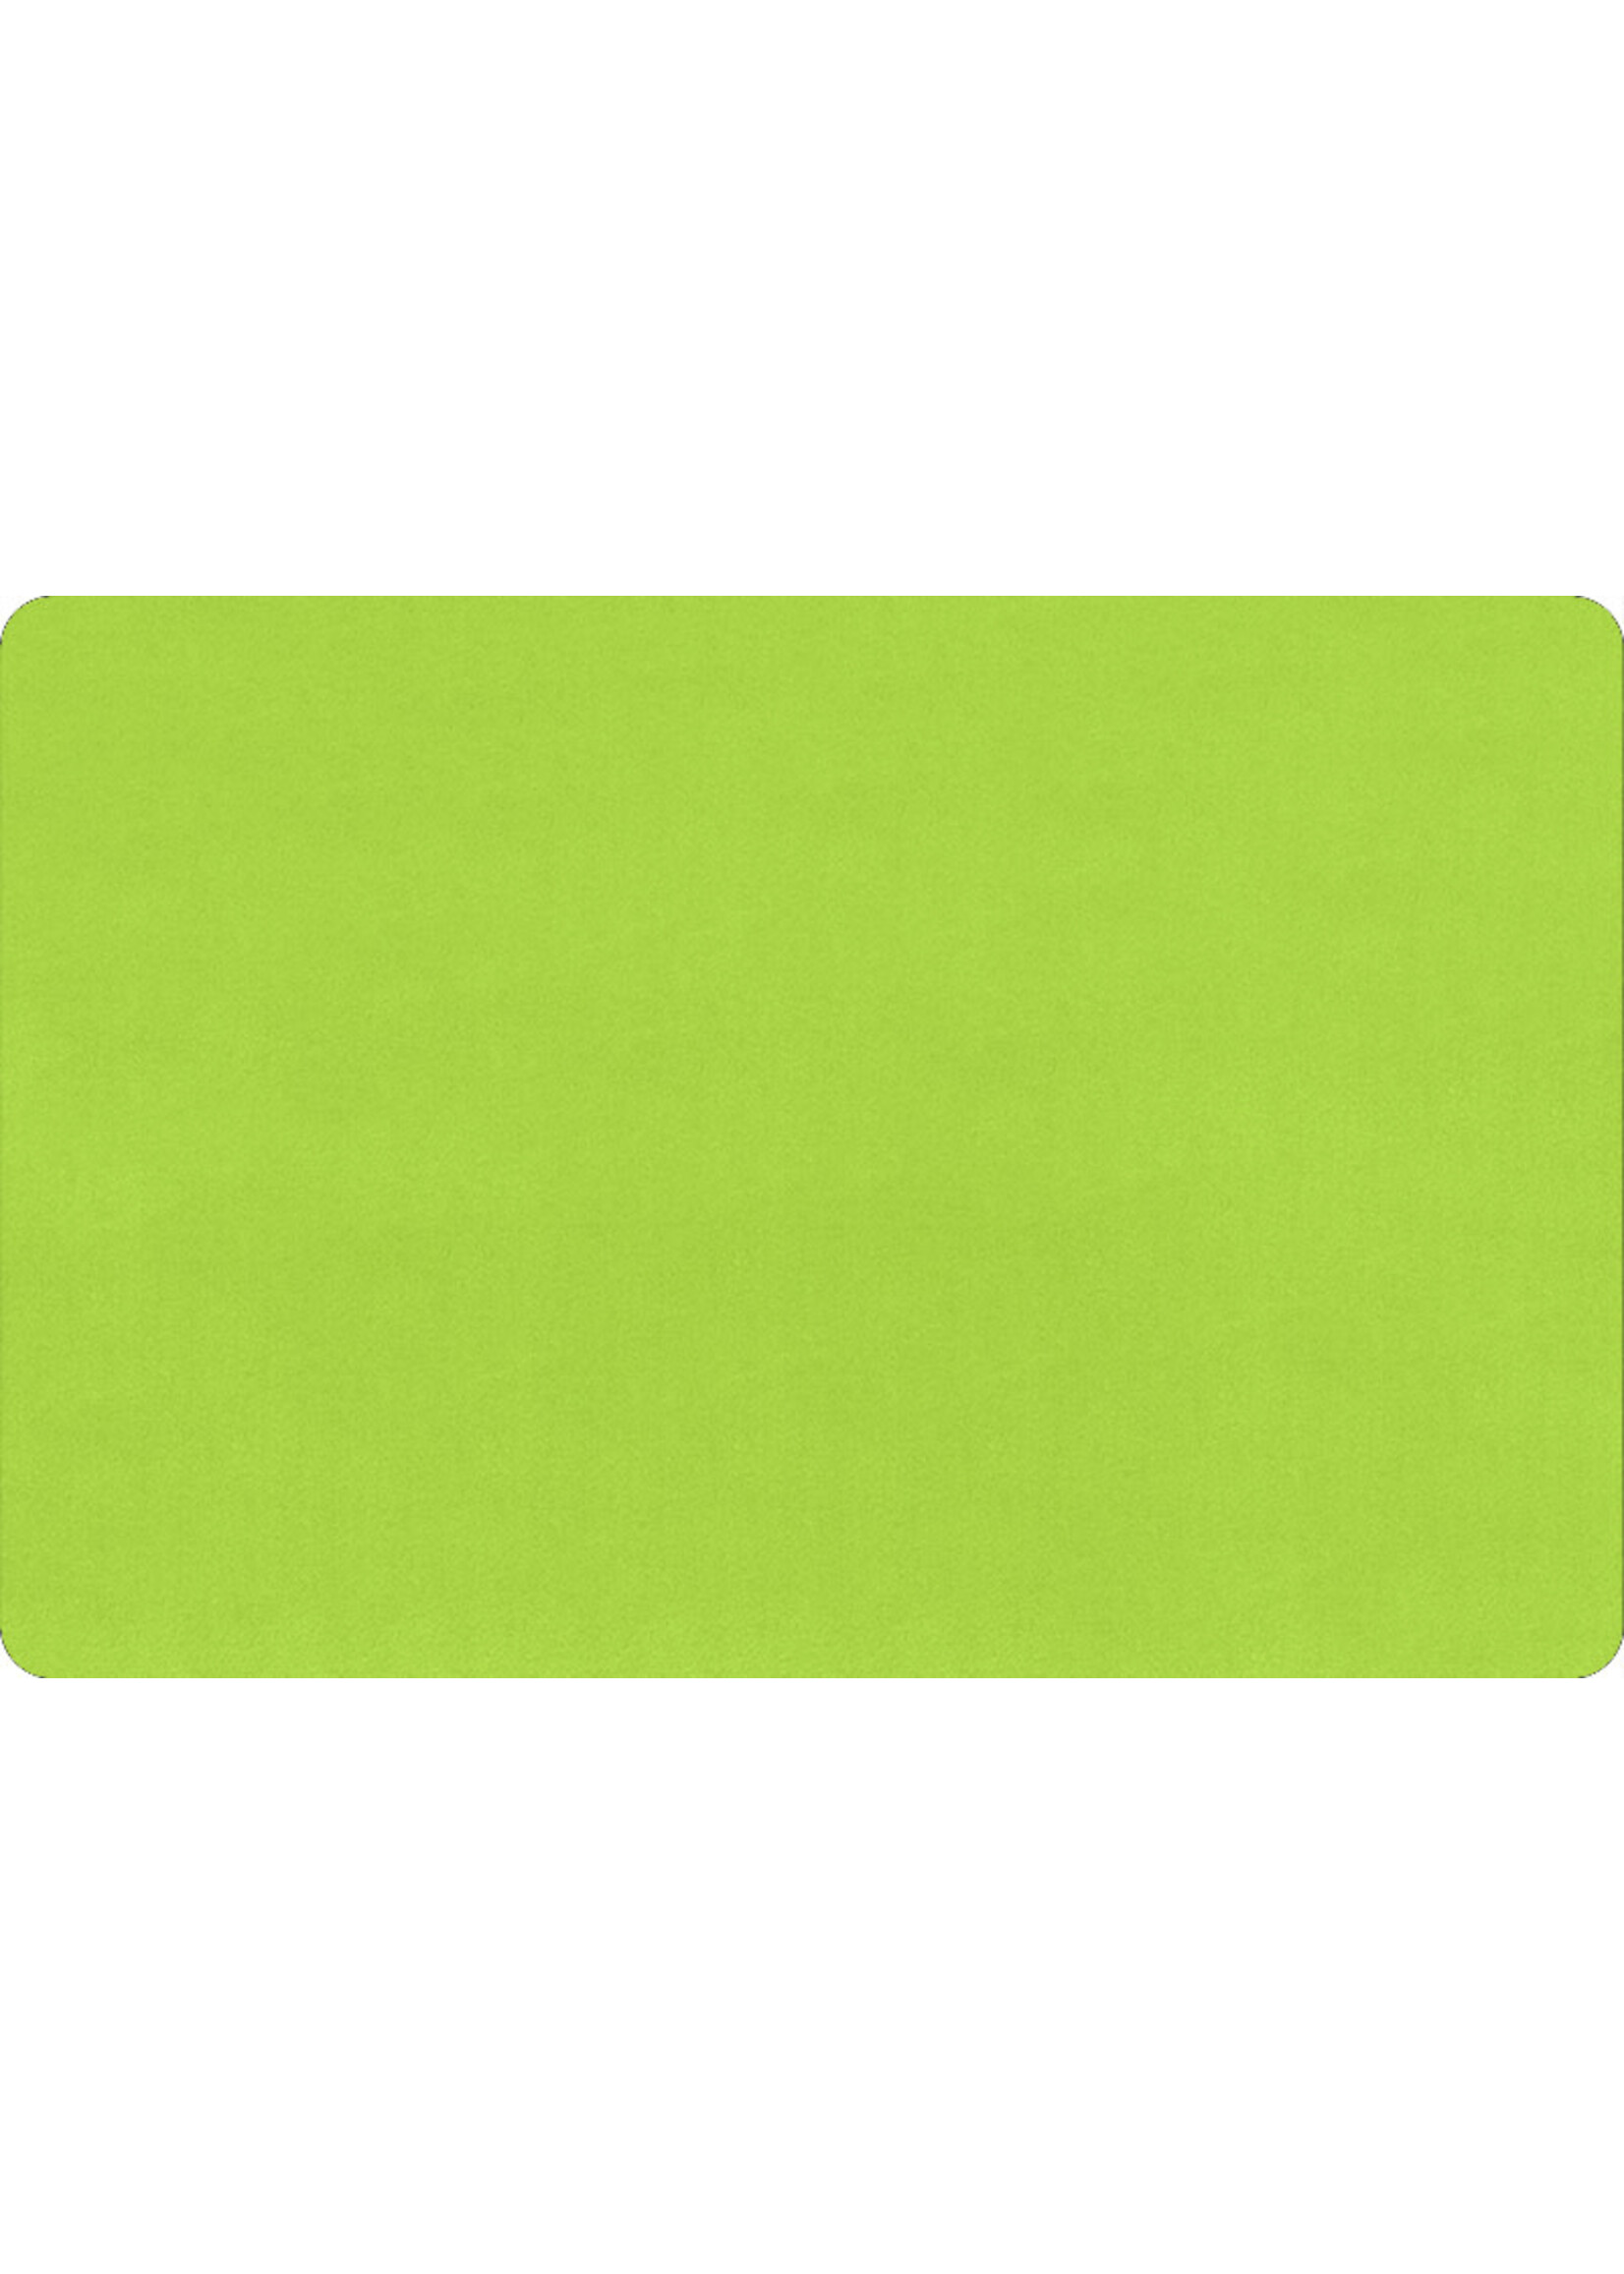 Shannon Fabrics Minky, Extra Wide Solid Cuddle3, 90" Dark Lime, (by the inch)